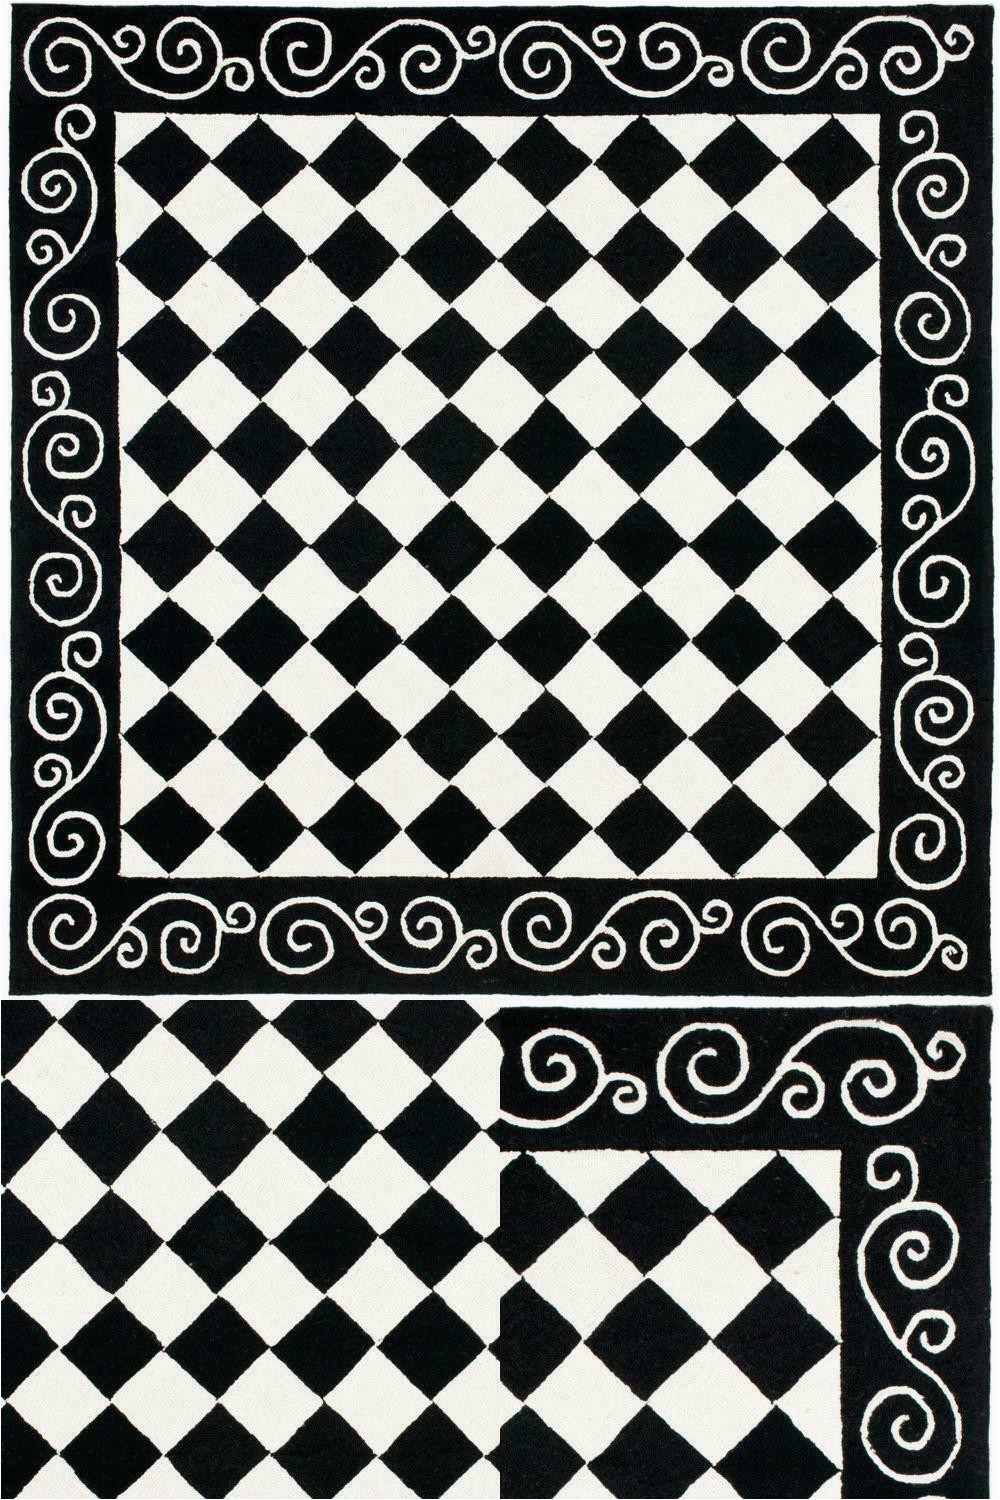 6 Foot Square area Rug Chelsea Black Ivory 6 Ft X 6 Ft Square area Rug